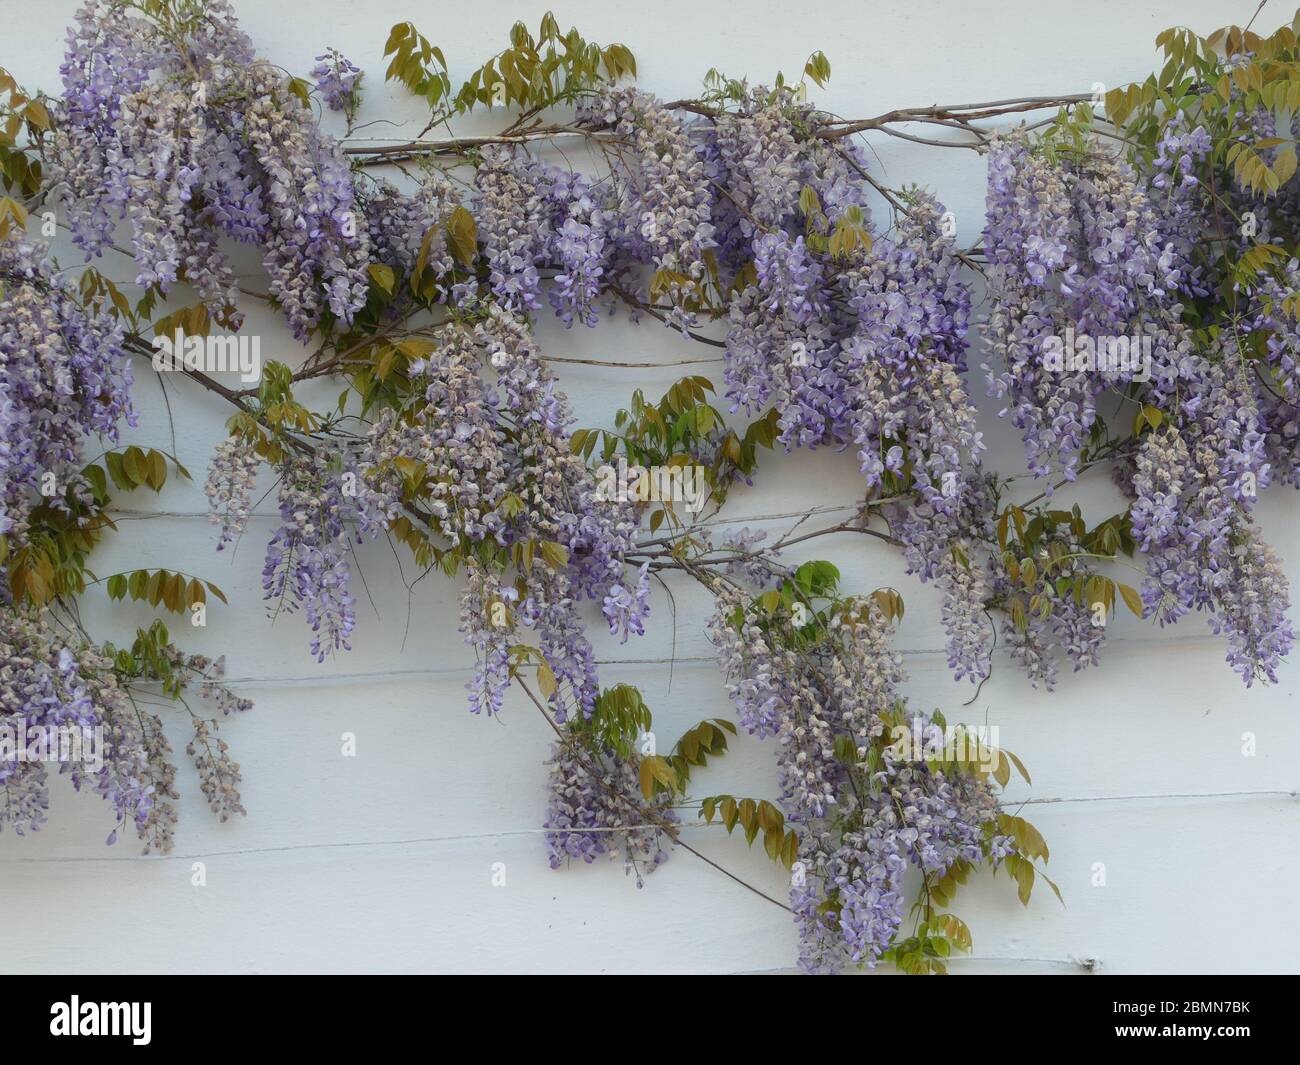 Wisteria growing on a White Wall Stock Photo